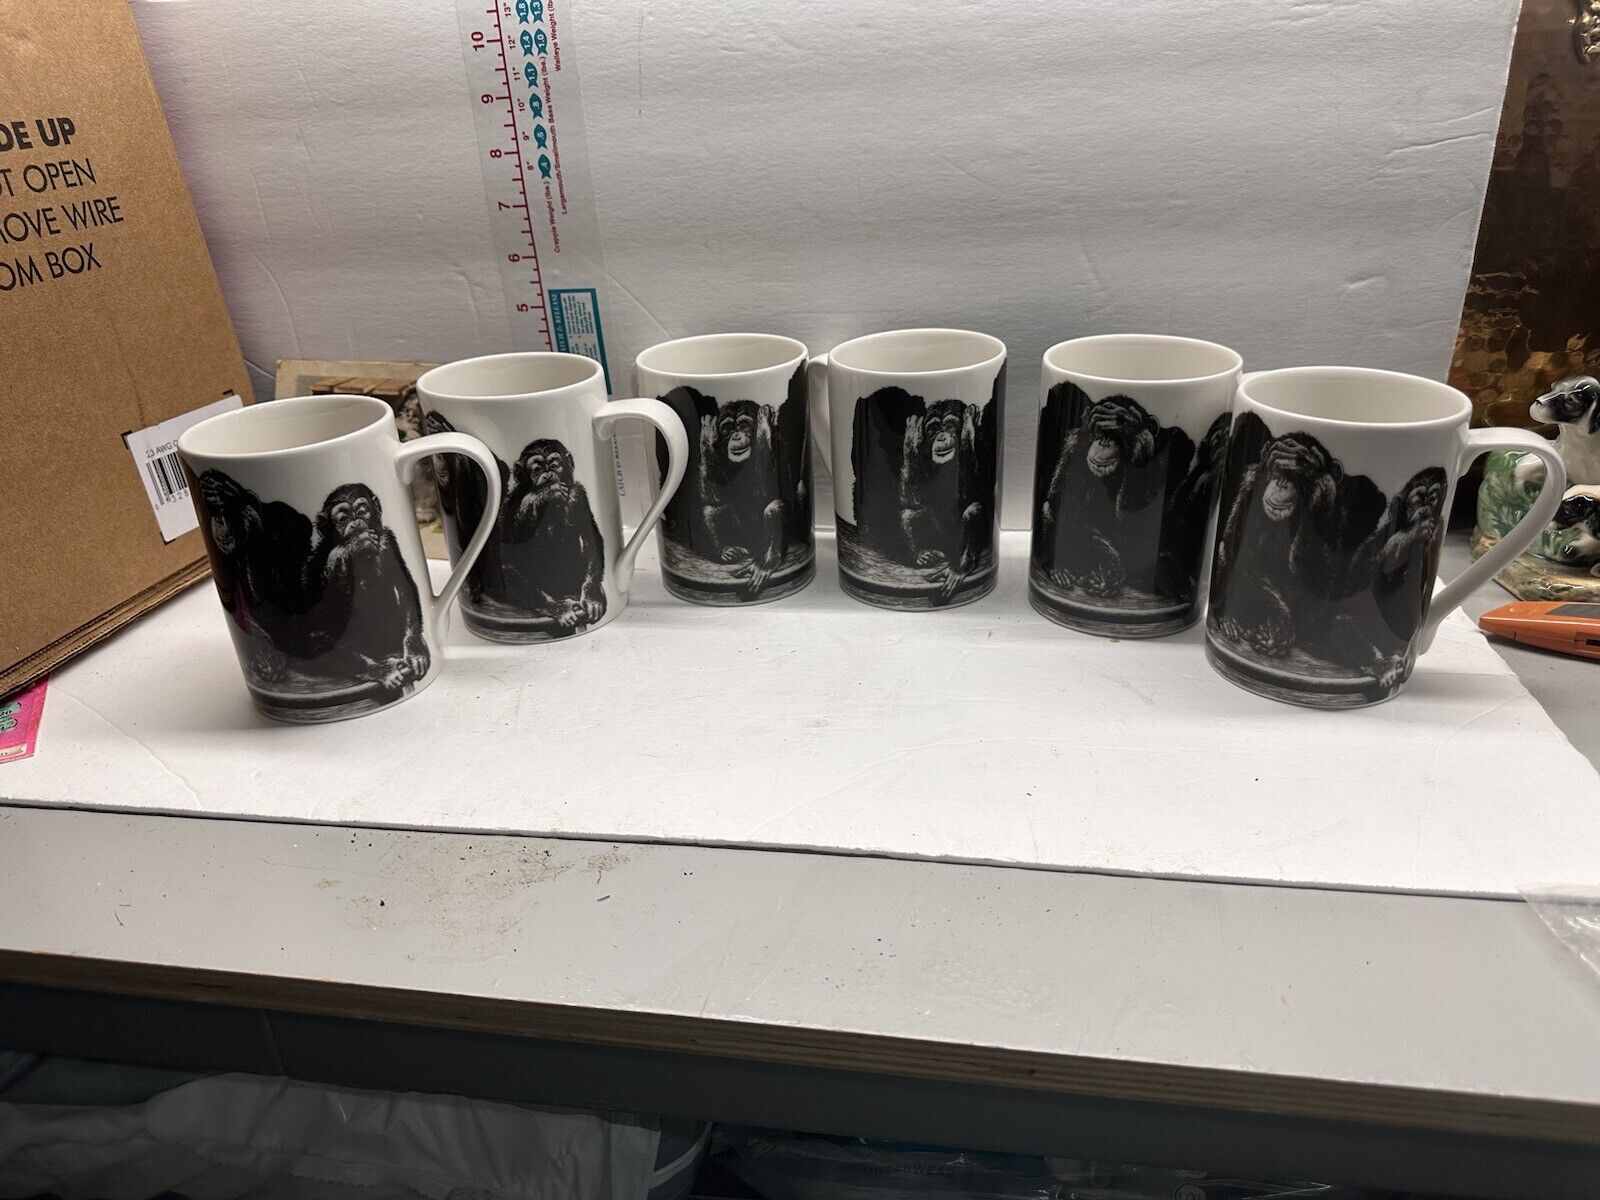 222 Fifth Slice Of Life NO EVIL Mugs Set Of 6 NEW Excellent